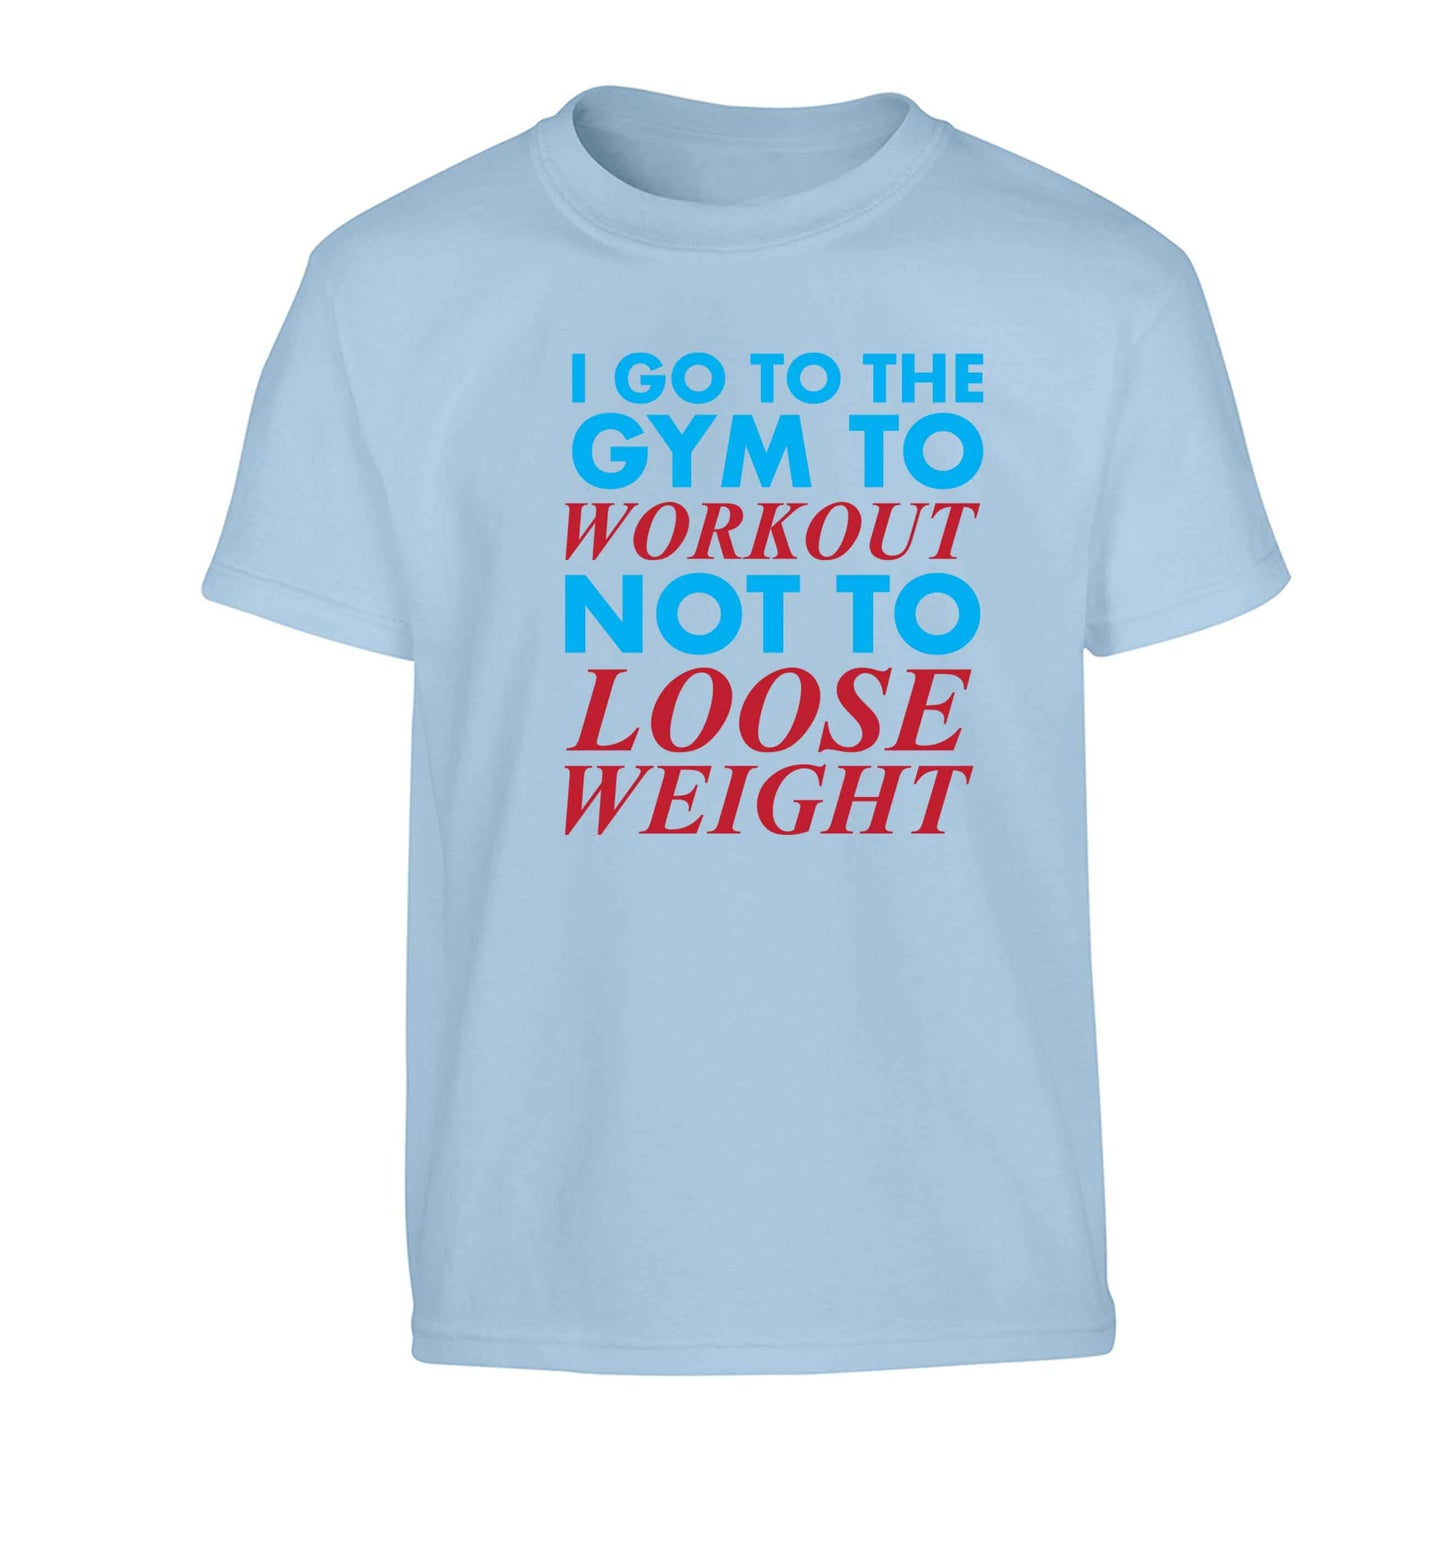 I go to the gym to workout not to loose weight Children's light blue Tshirt 12-13 Years